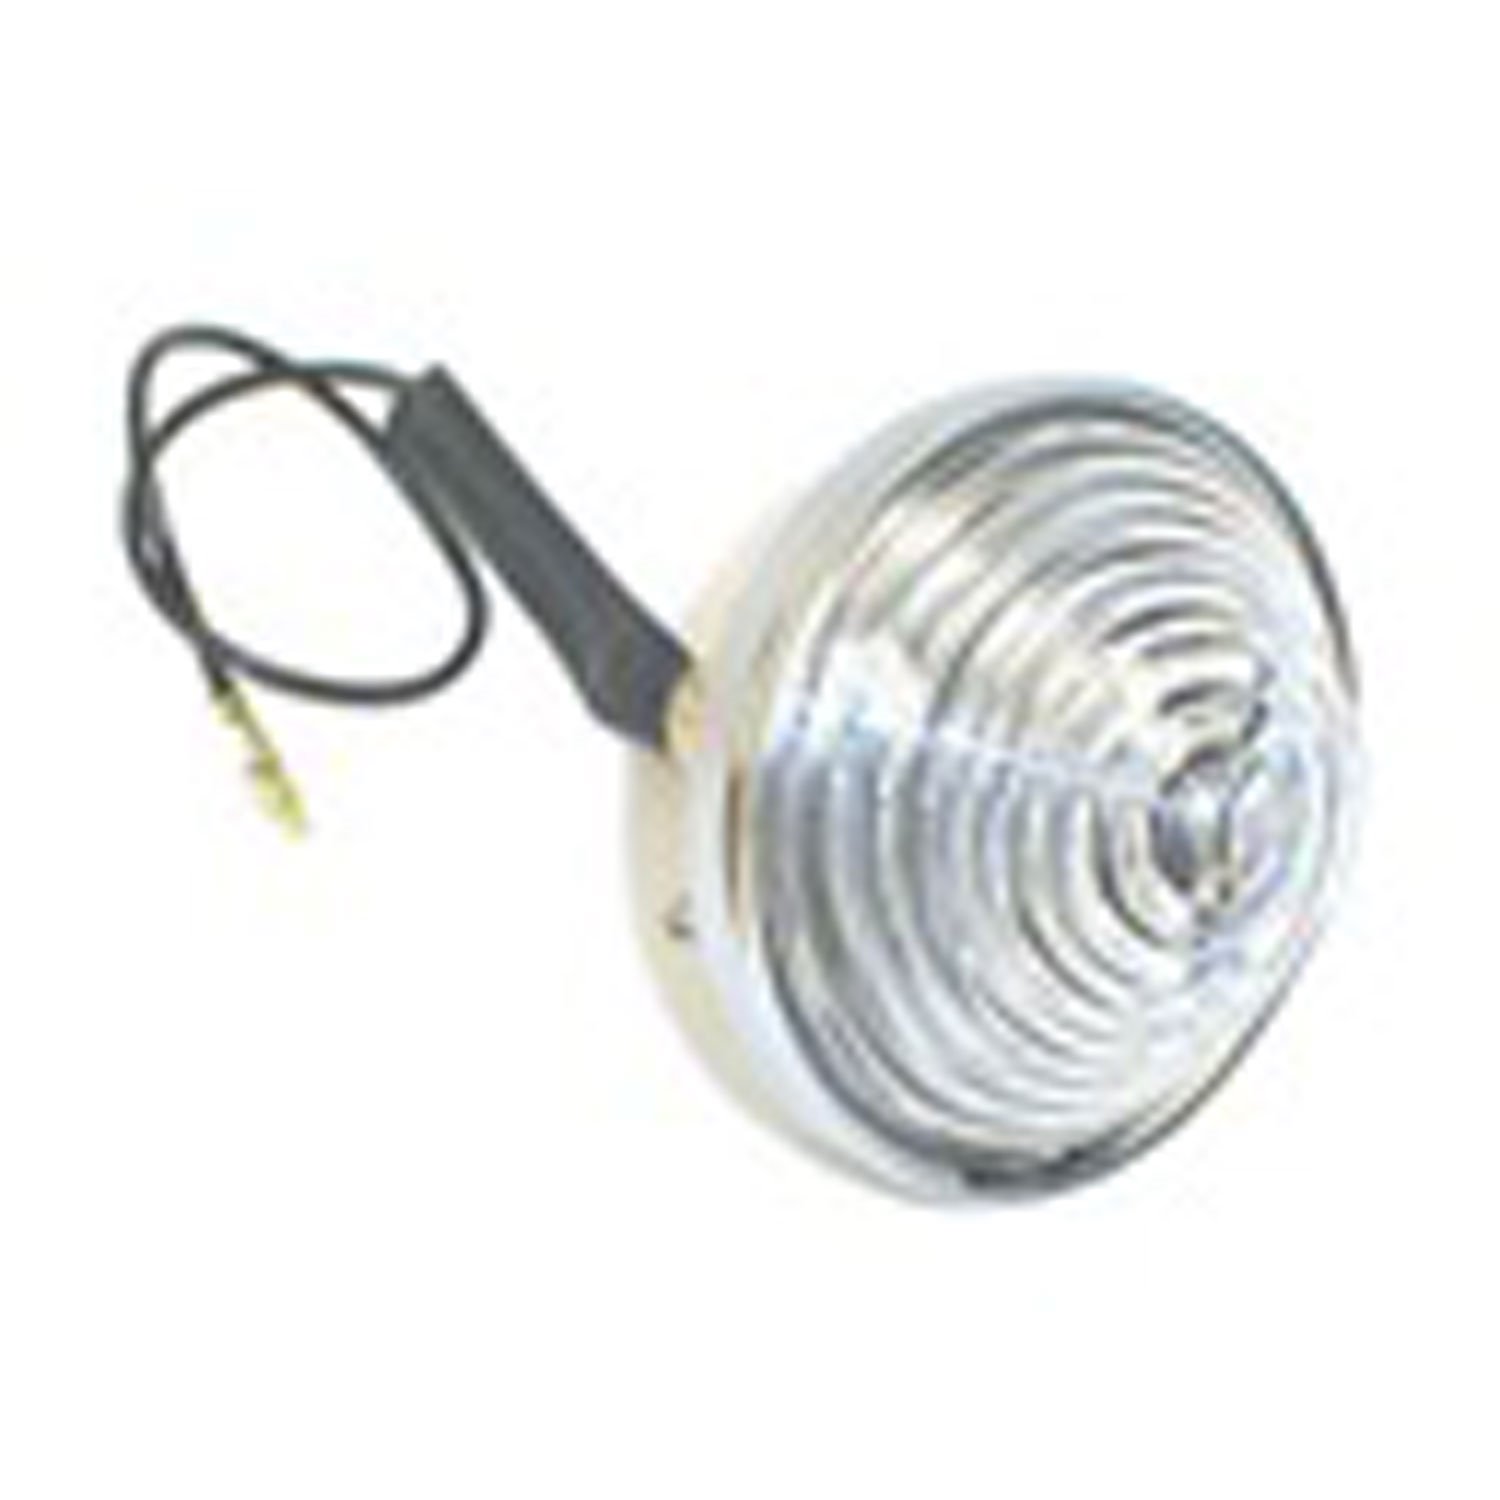 This clear back-up light assembly from Omix-ADA fits 46-75 Jeep CJ models.